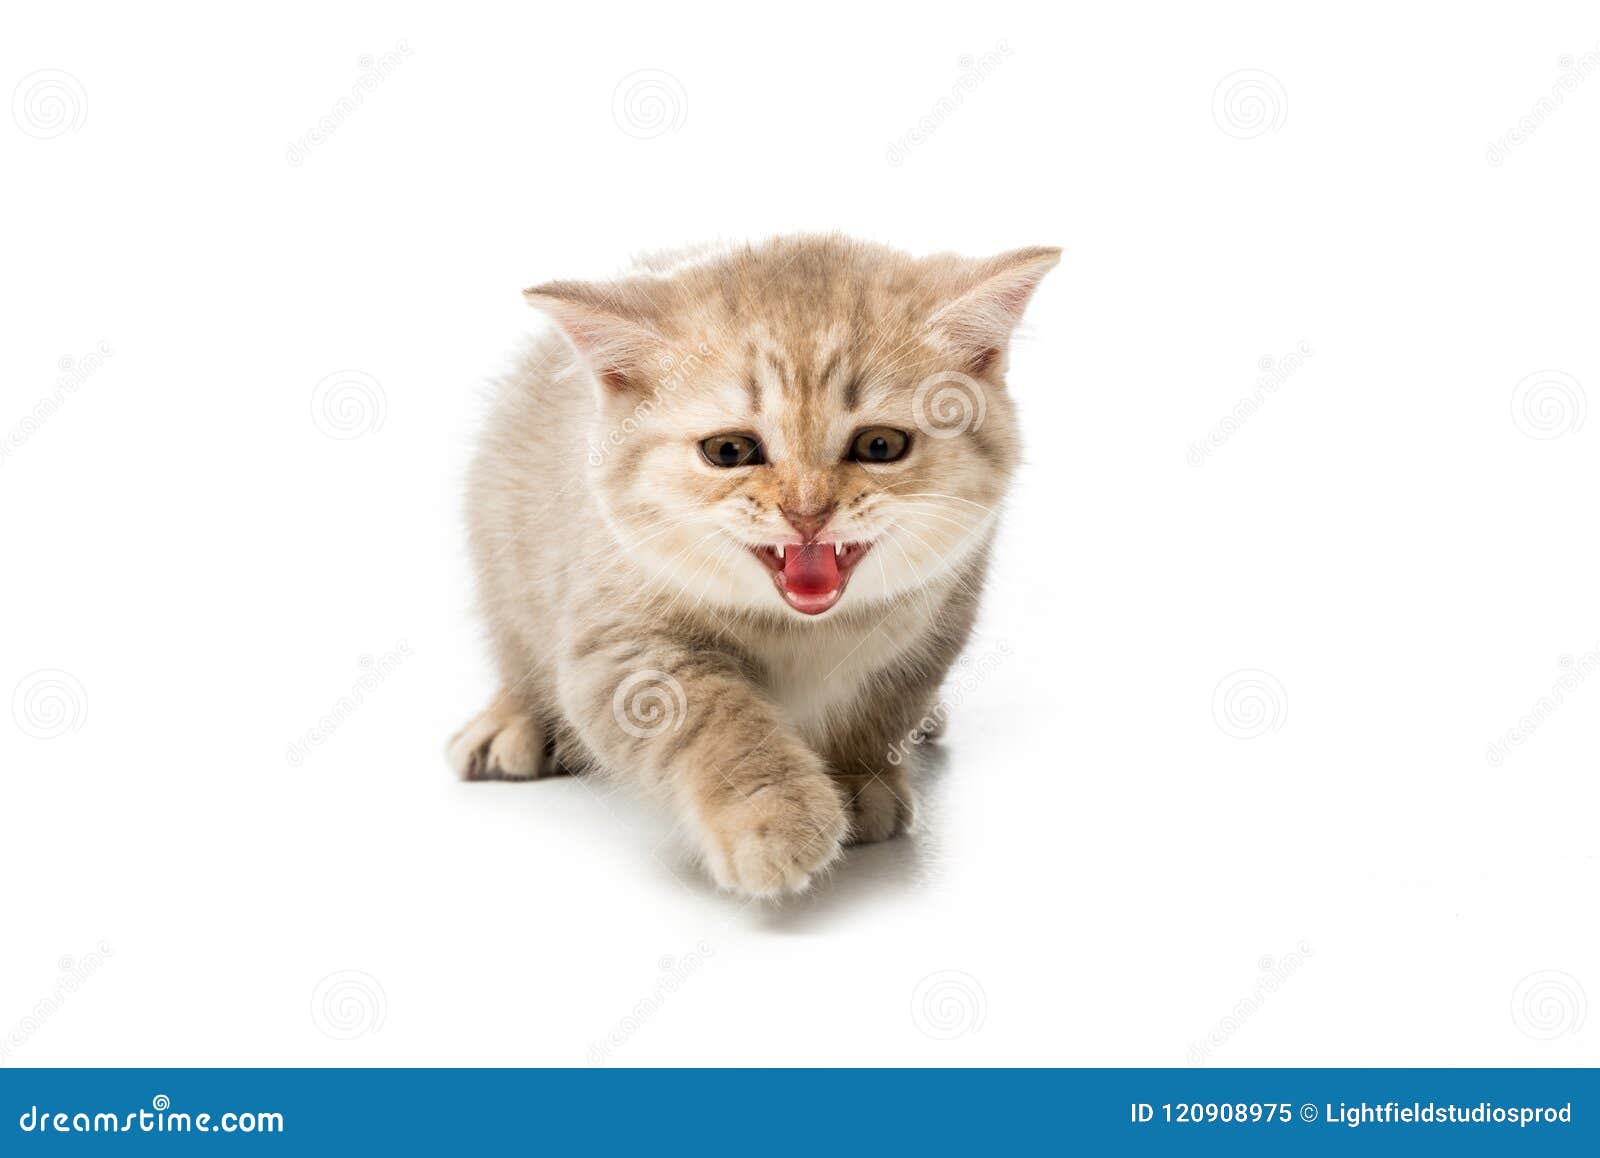 Cute Little Kitten Meowing And Looking At Camera Stock Image Image of